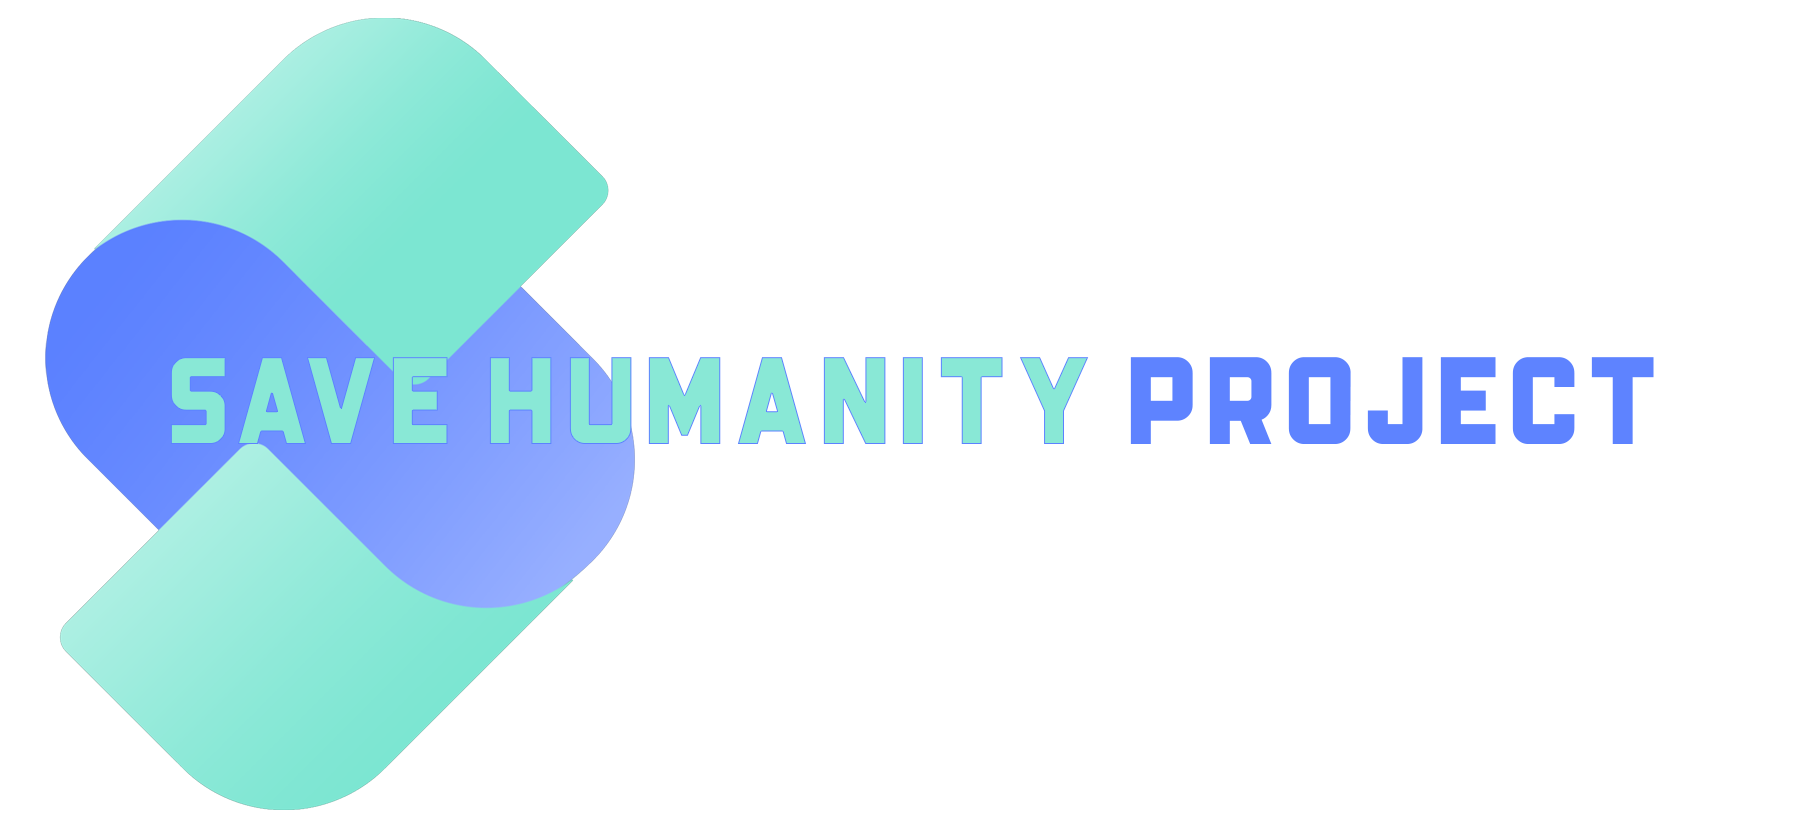 The Save Humanity Project